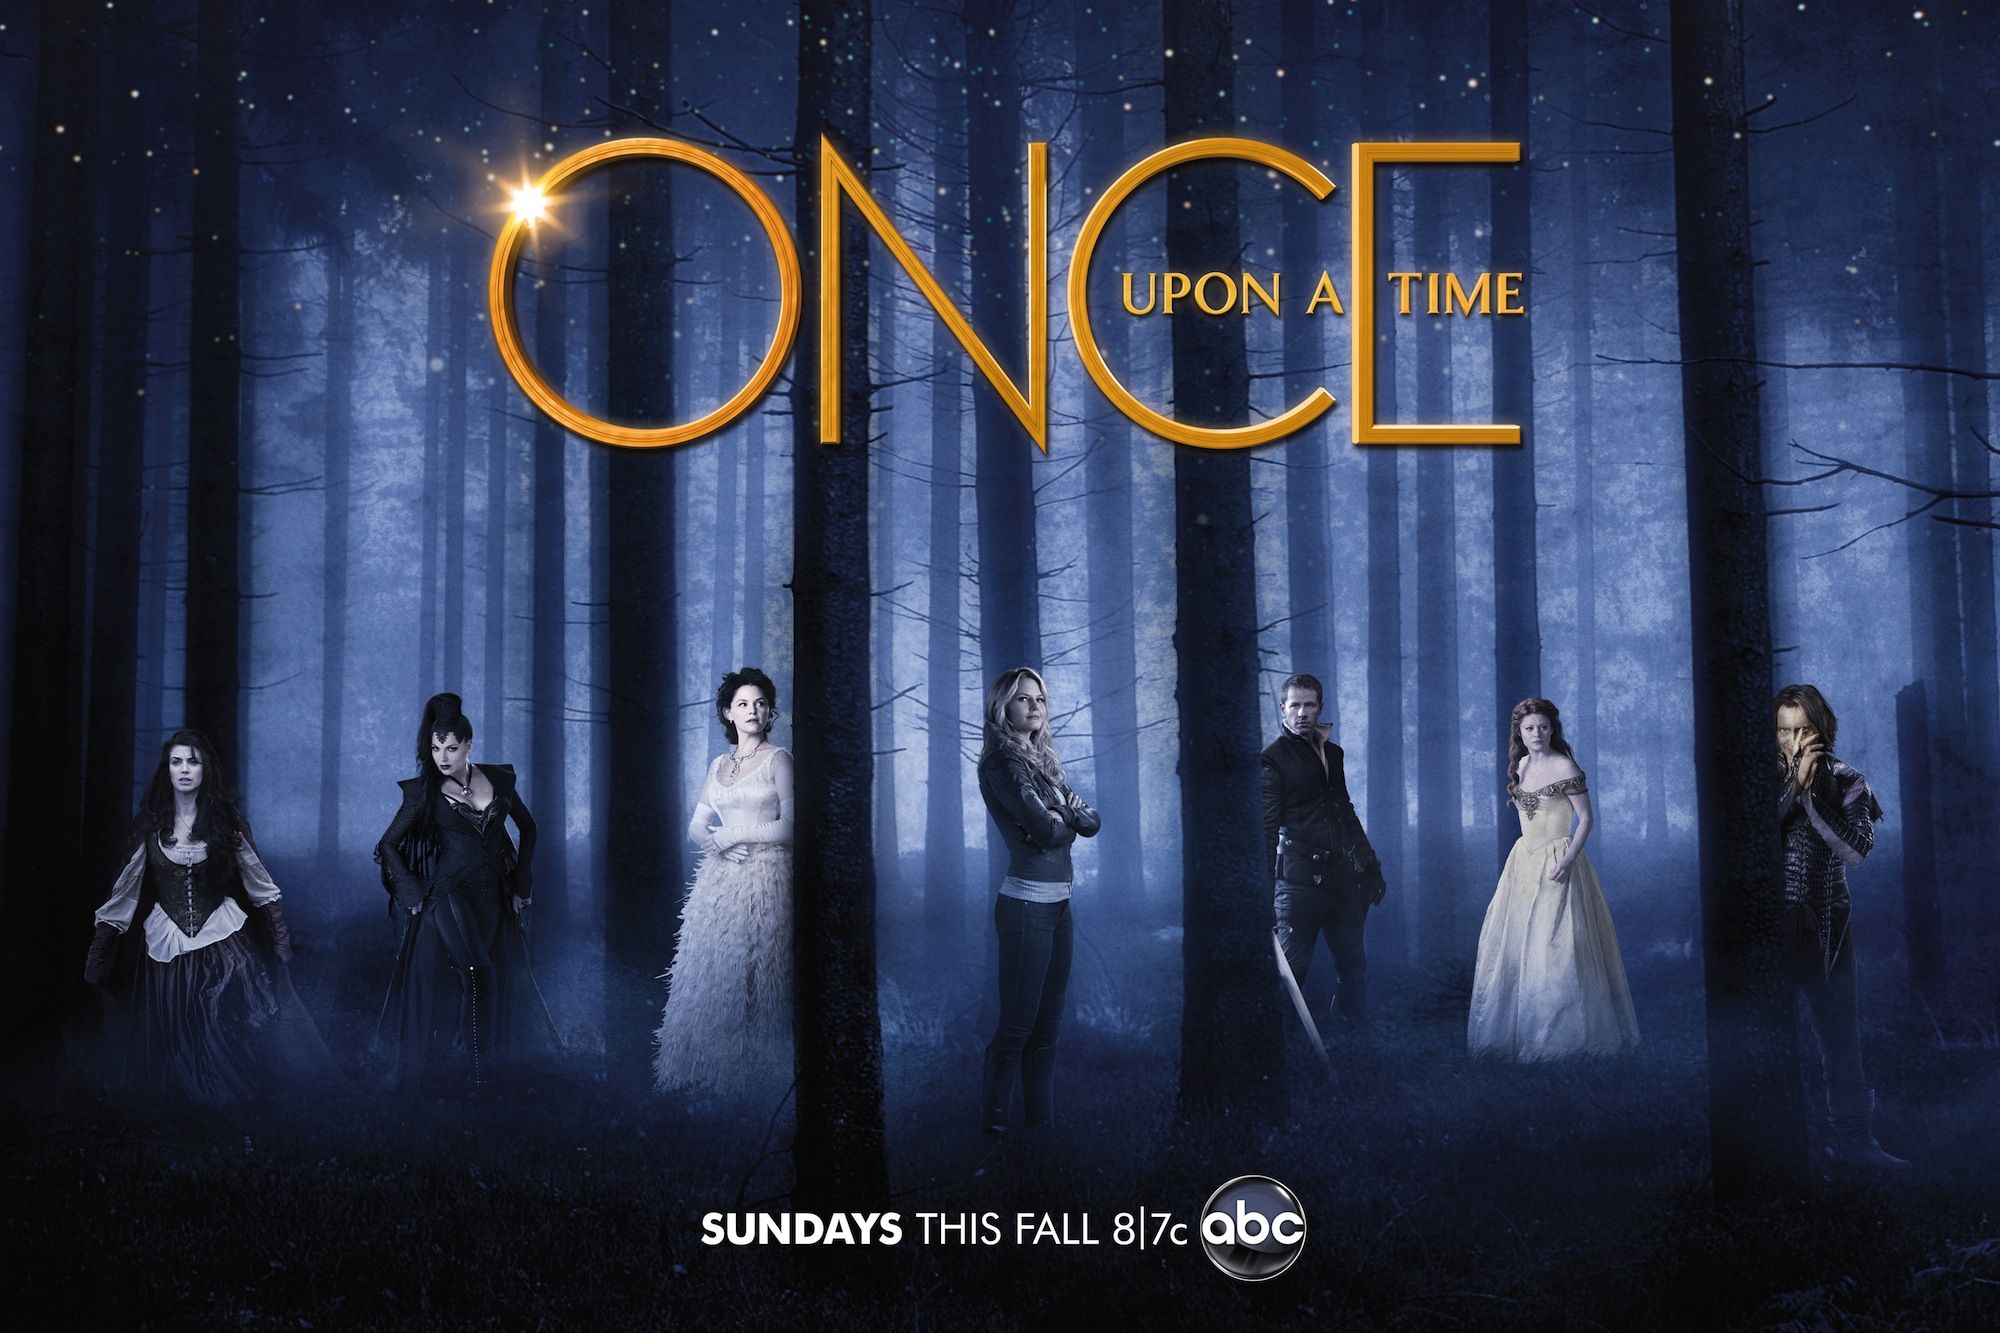 ABC Once Upon a Time season two poster